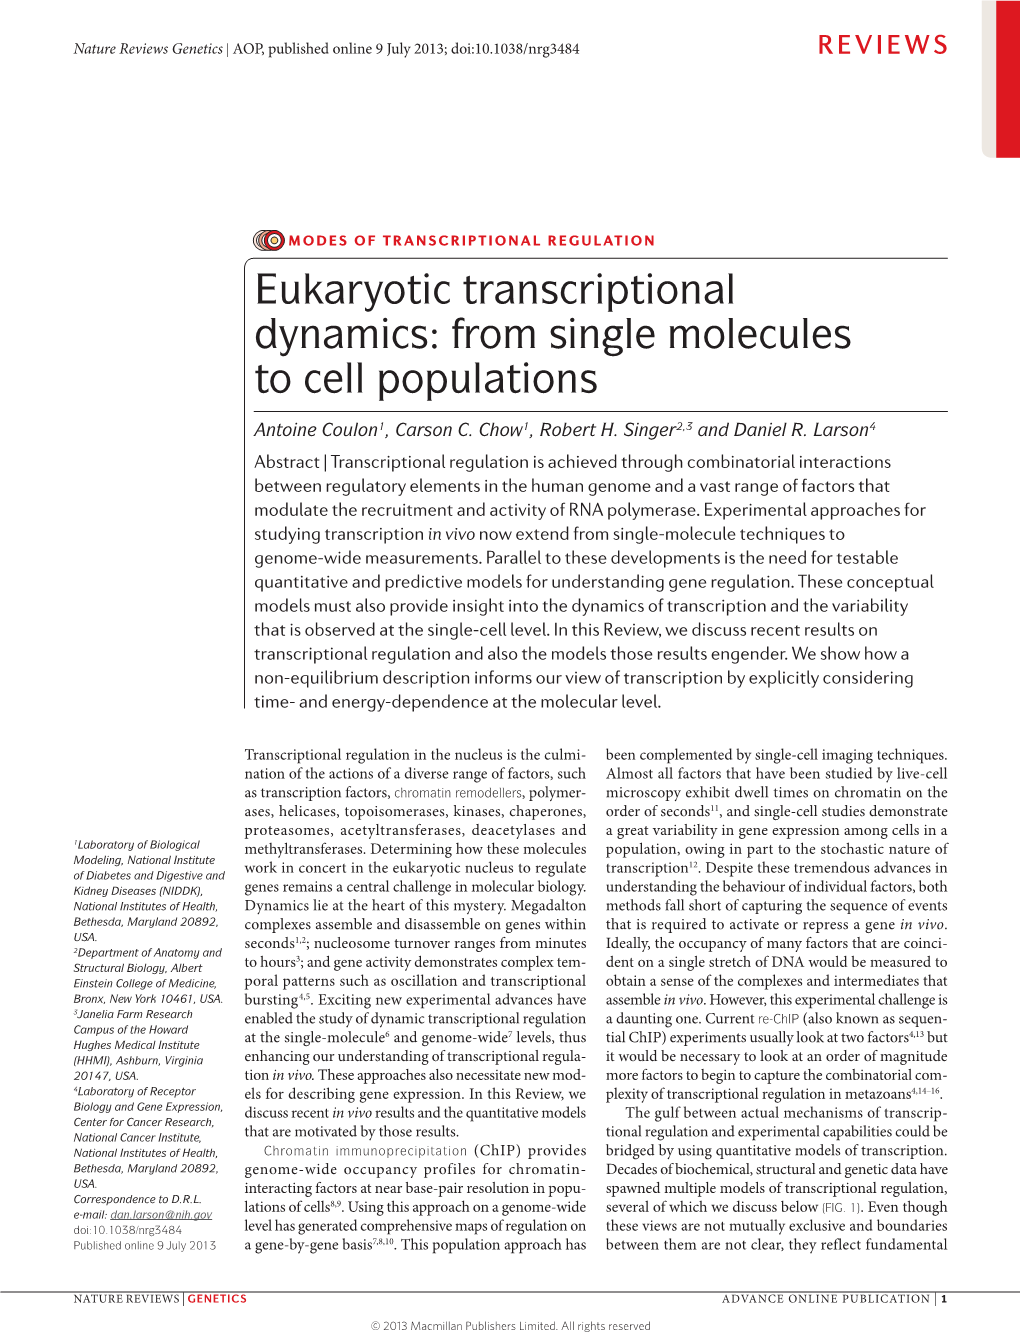 Eukaryotic Transcriptional Dynamics: from Single Molecules to Cell Populations